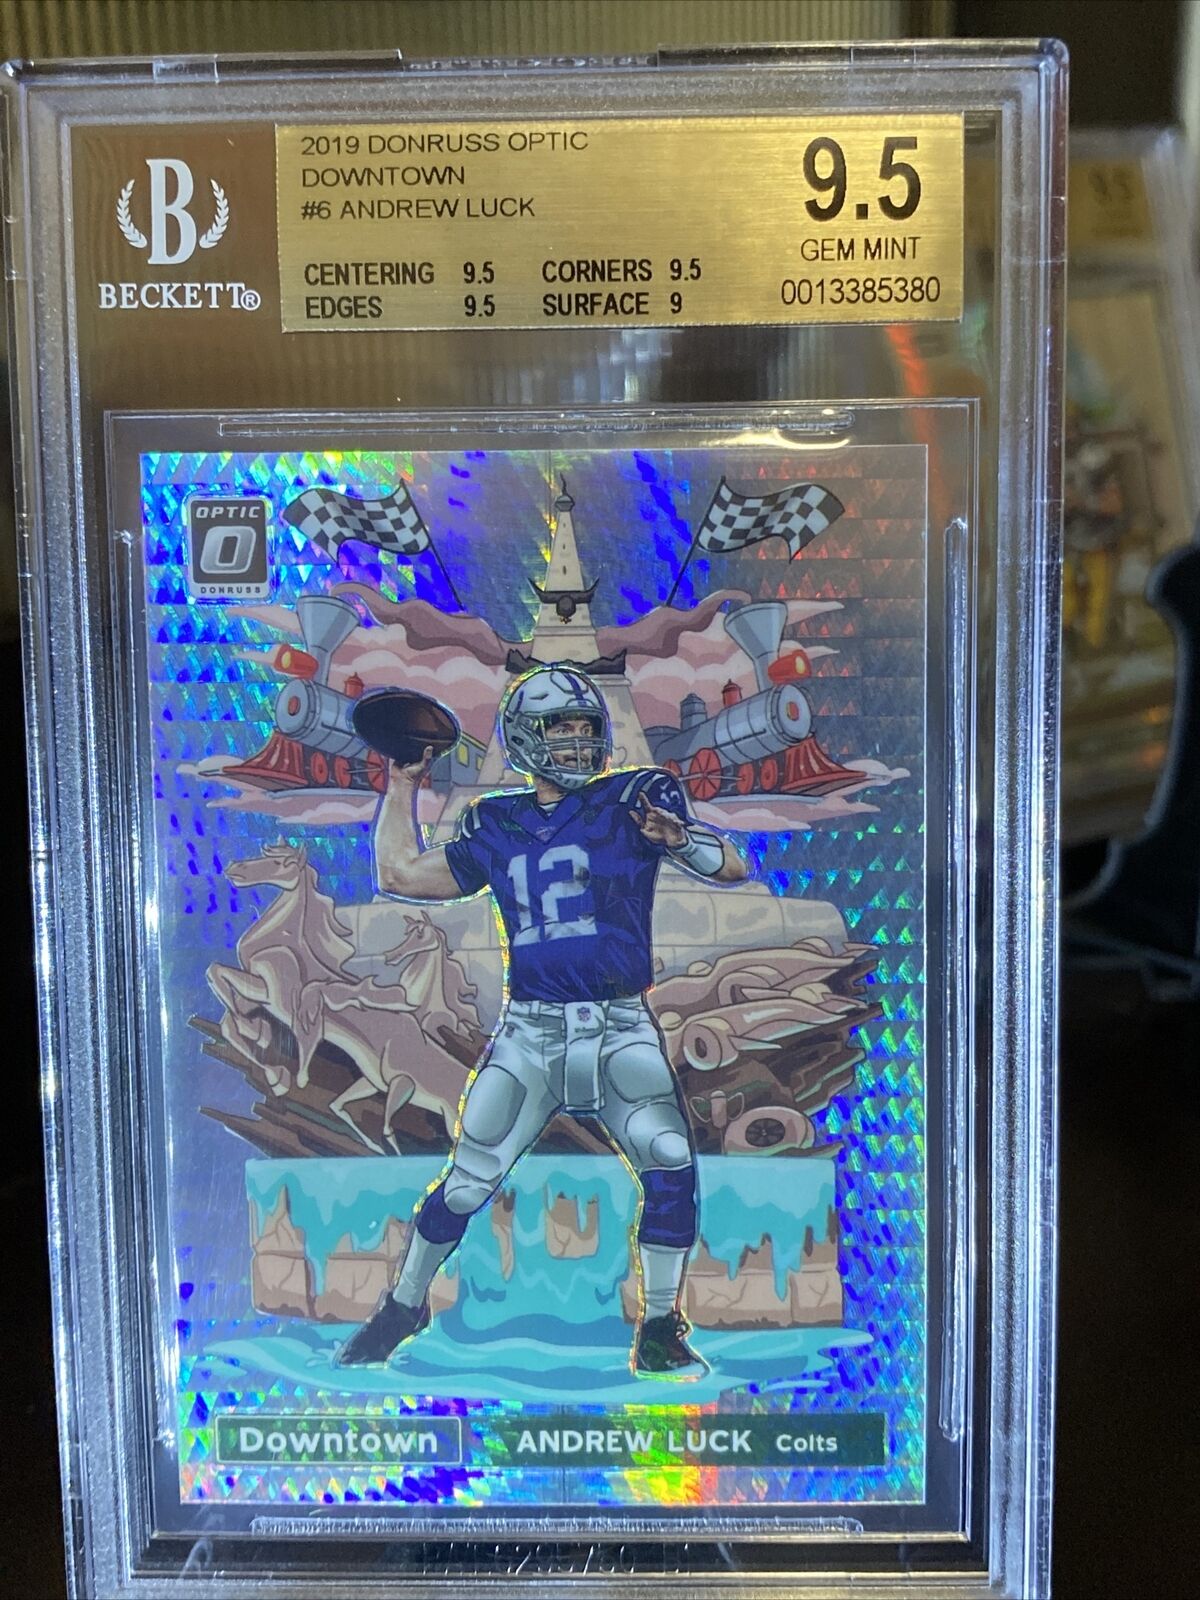 2019 Downtown Andrew Luck Optic DT-6 BGS 9.5 💎 Indy Colts QB1 👀 Captain! 🍀